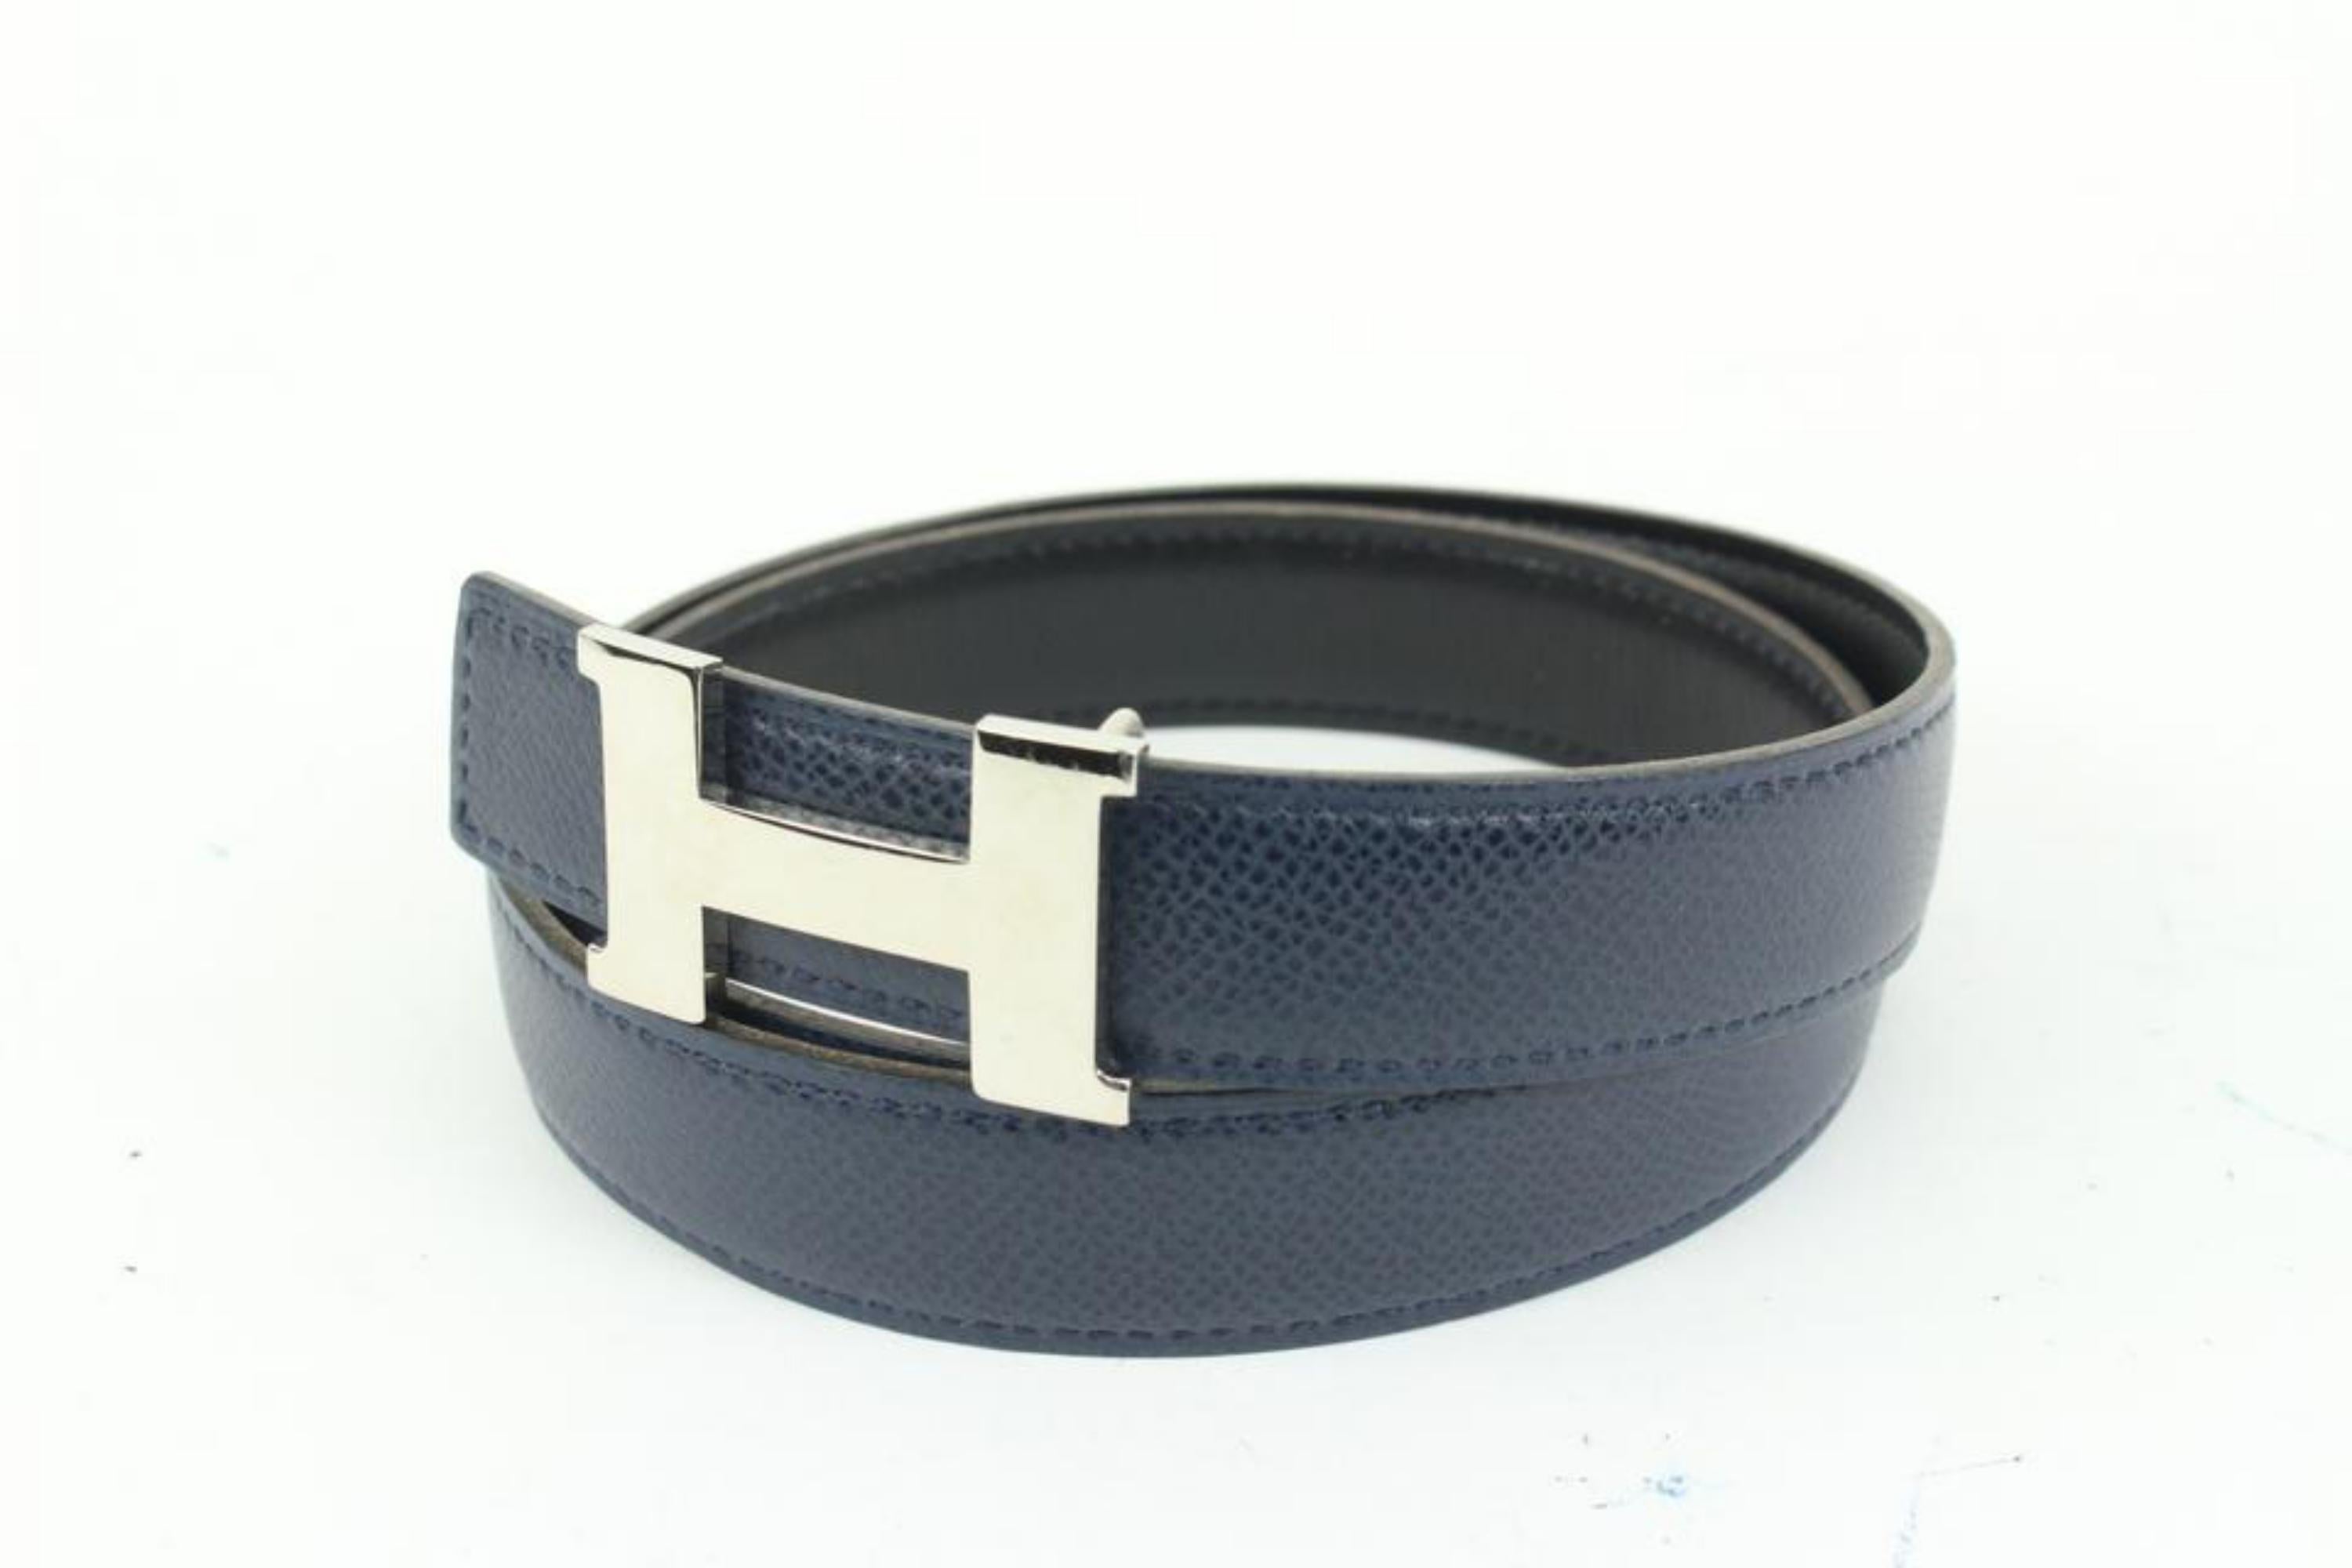 Hermès Navy x Black x Silver 24mm Reversible H Logo Belt Kit  1h425s
Date Code/Serial Number: F in a Square
Made In: France
Measurements: Length:  33.5